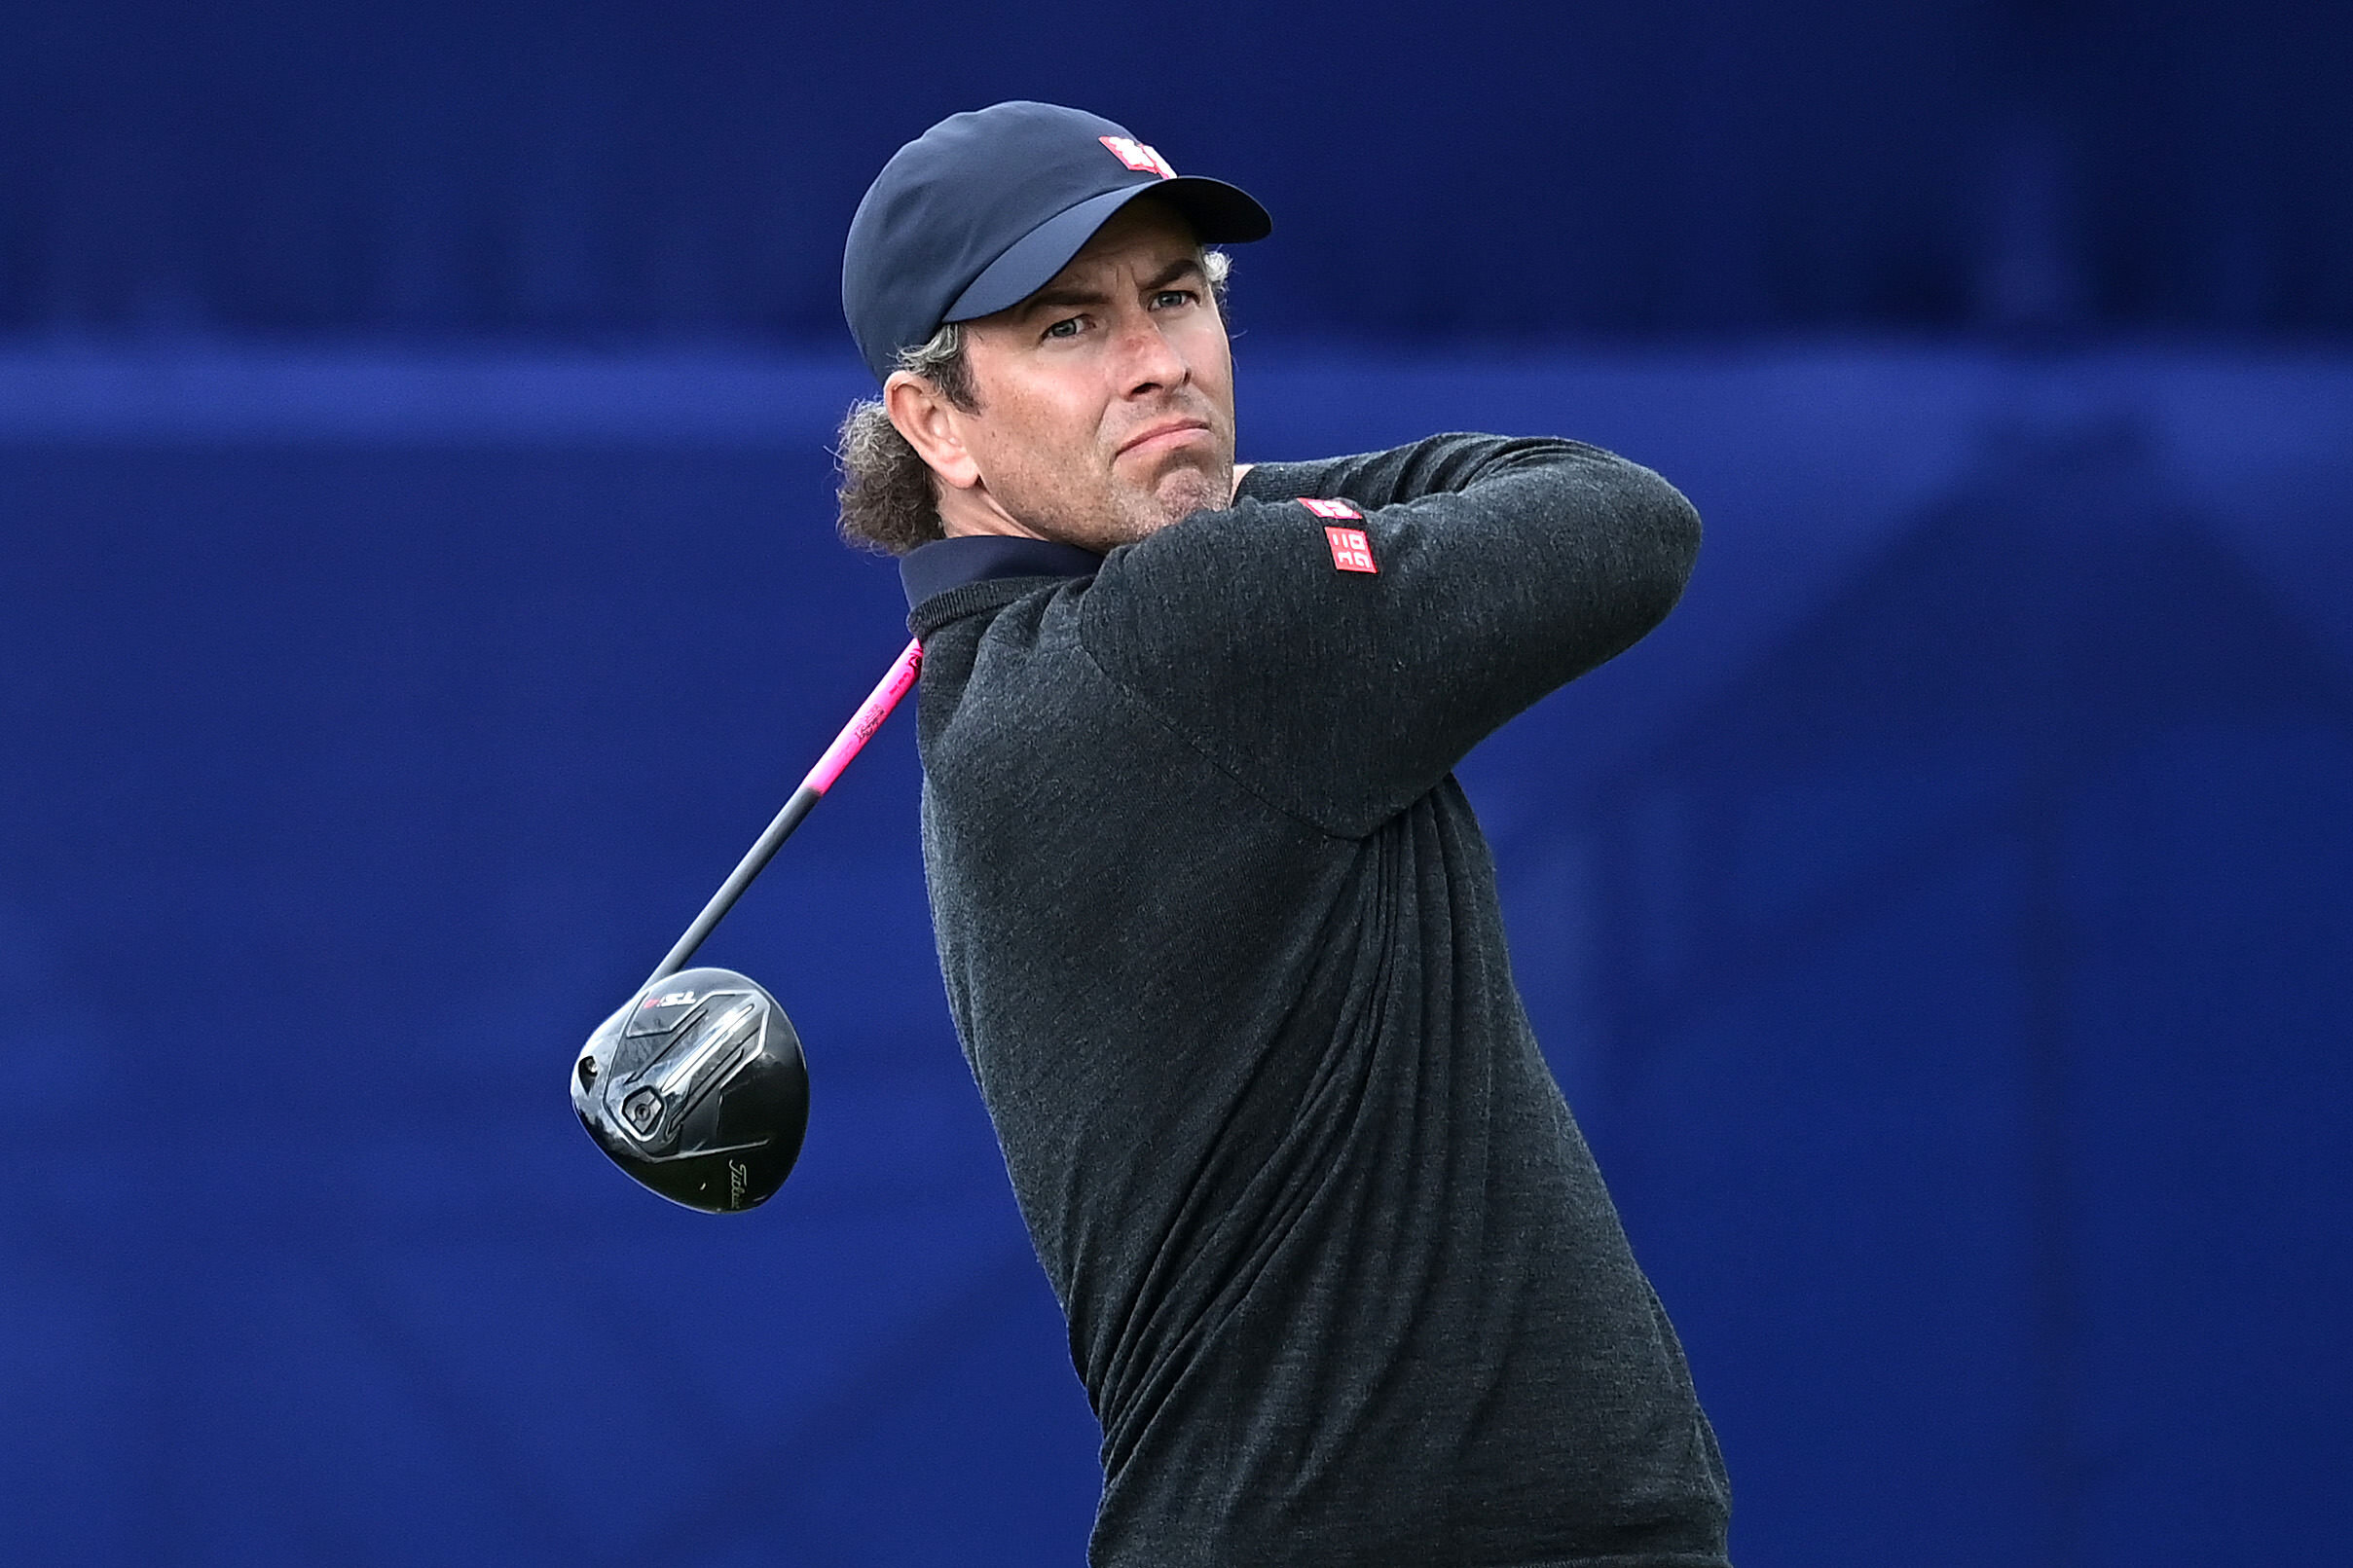  SAN DIEGO, CALIFORNIA - JANUARY 29: Adam Scott hits his tee shot on the 7th hole during round two of the Farmers Insurance Open at Torrey Pines on January 29, 2021 in San Diego, California. (Photo by Donald Miralle/Getty Images) 